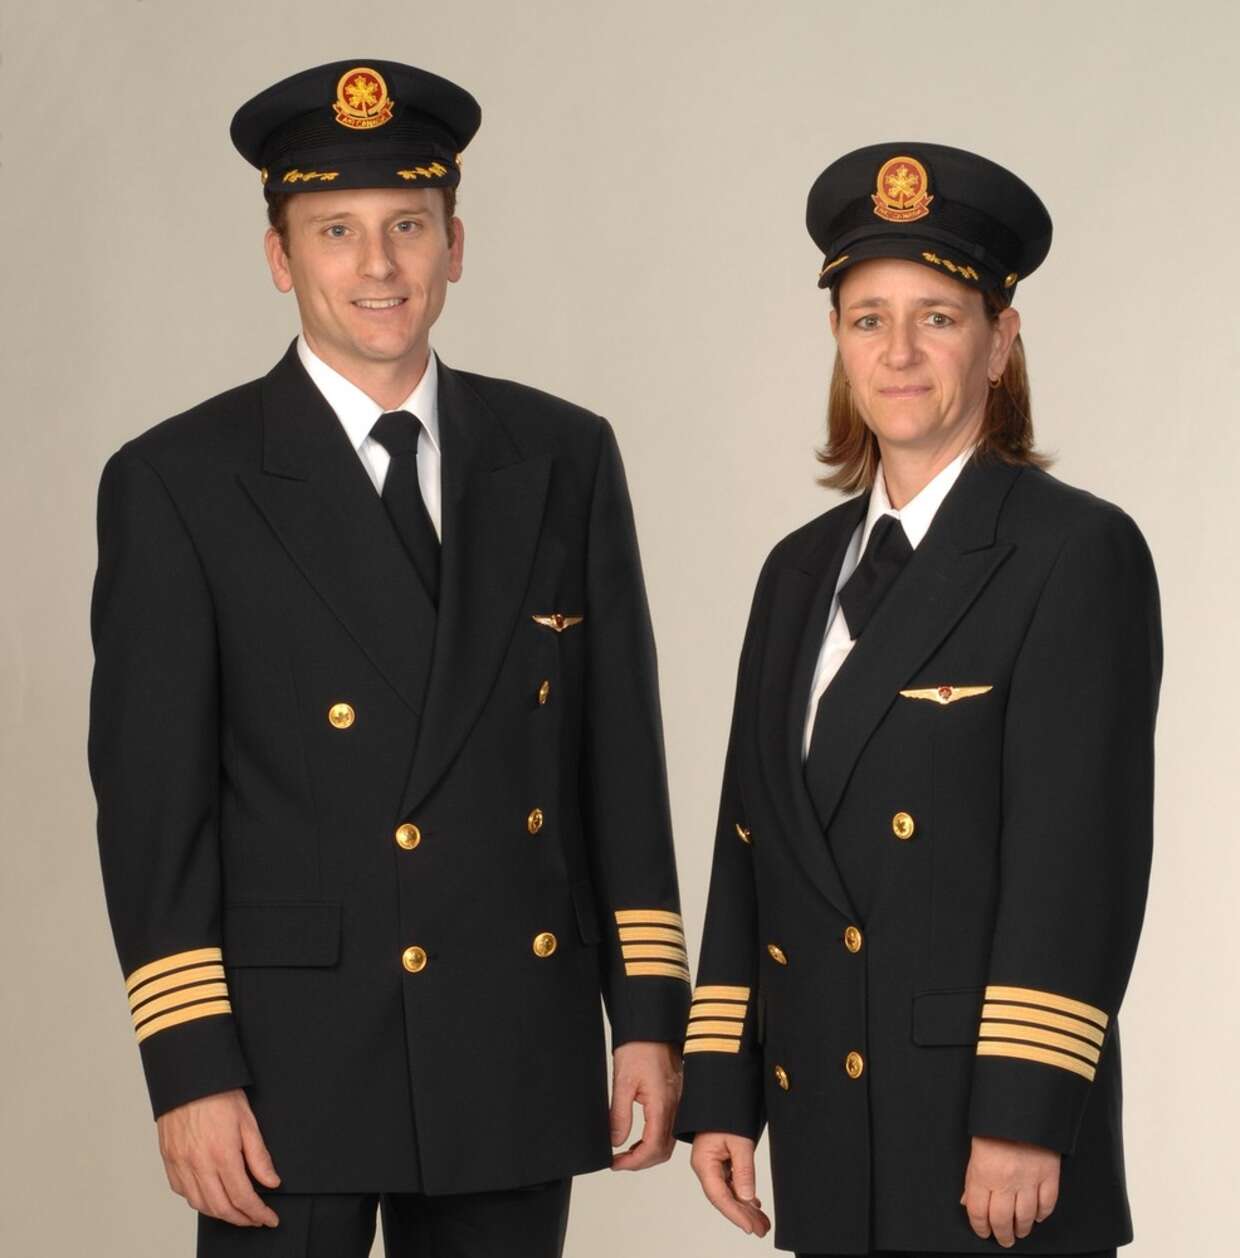 Pilot Uniforms Suppliers in the UAE